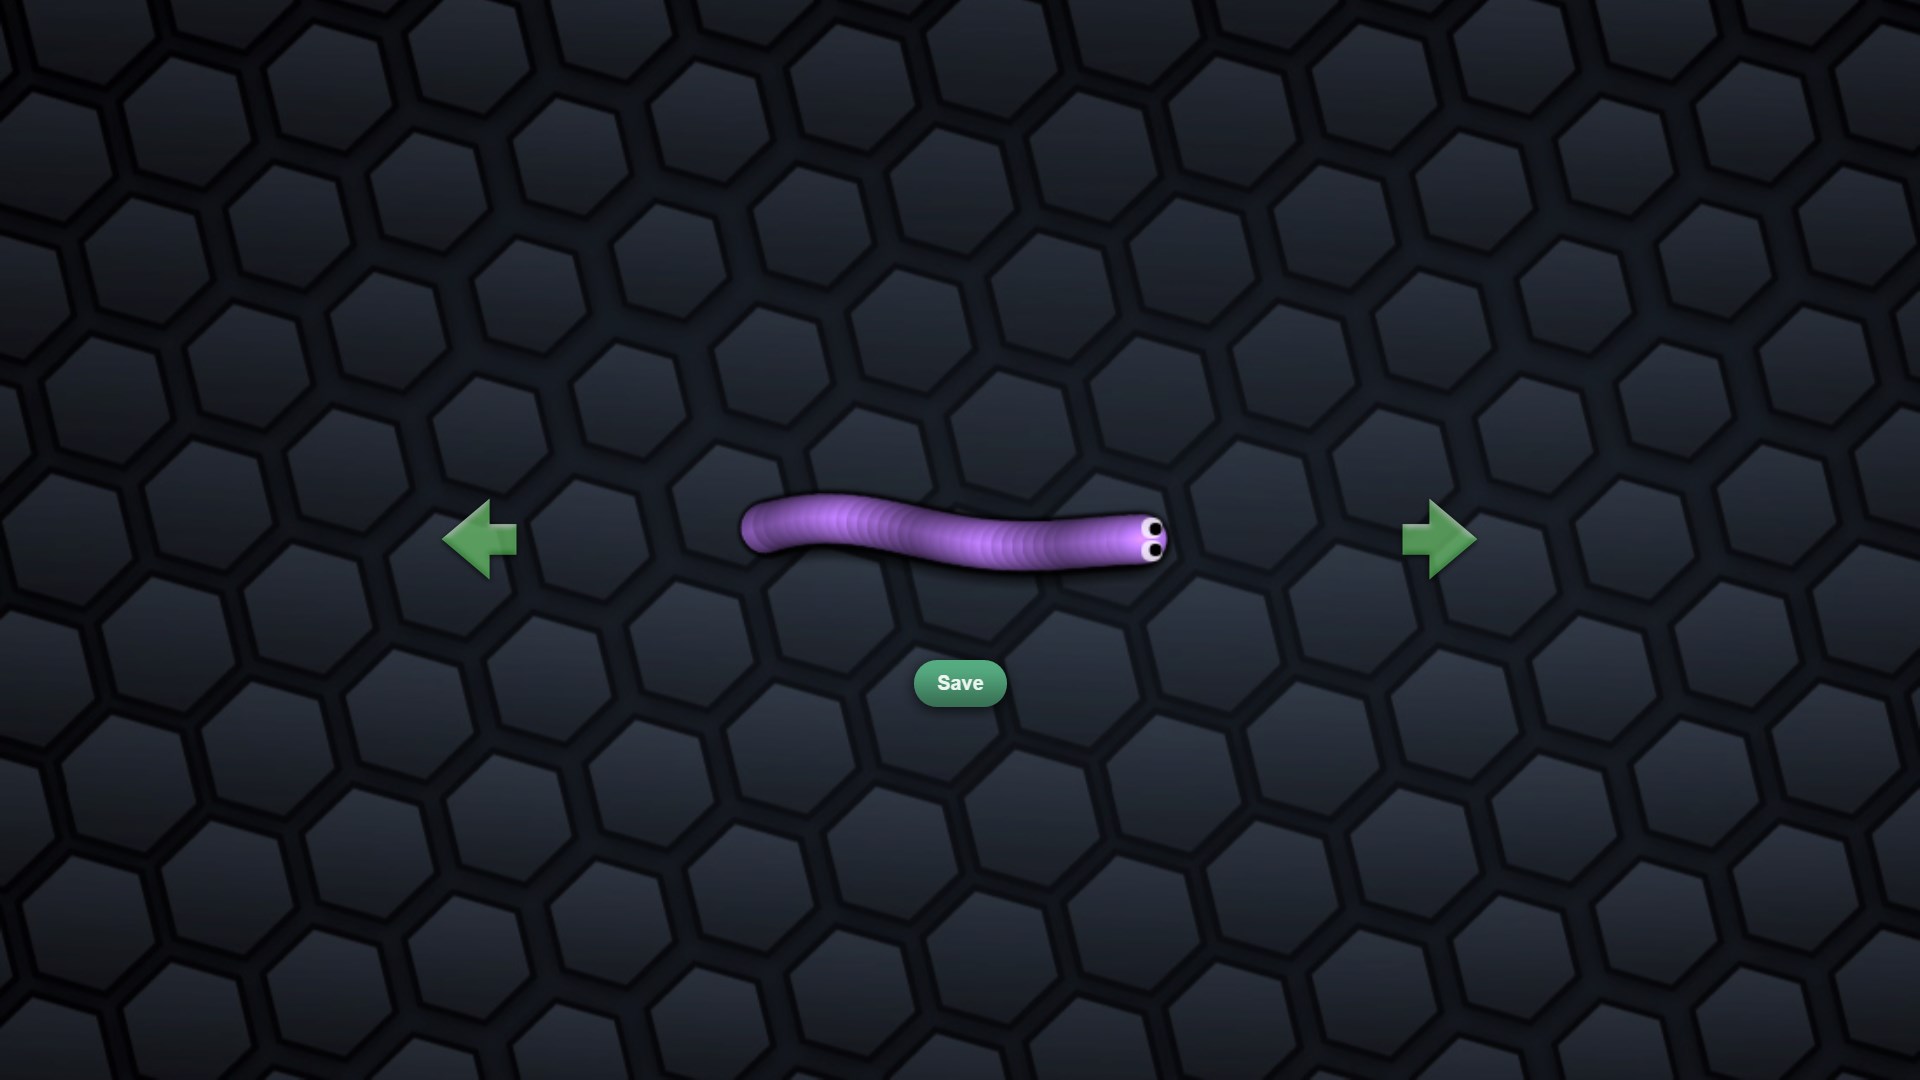 Http://slither.io/